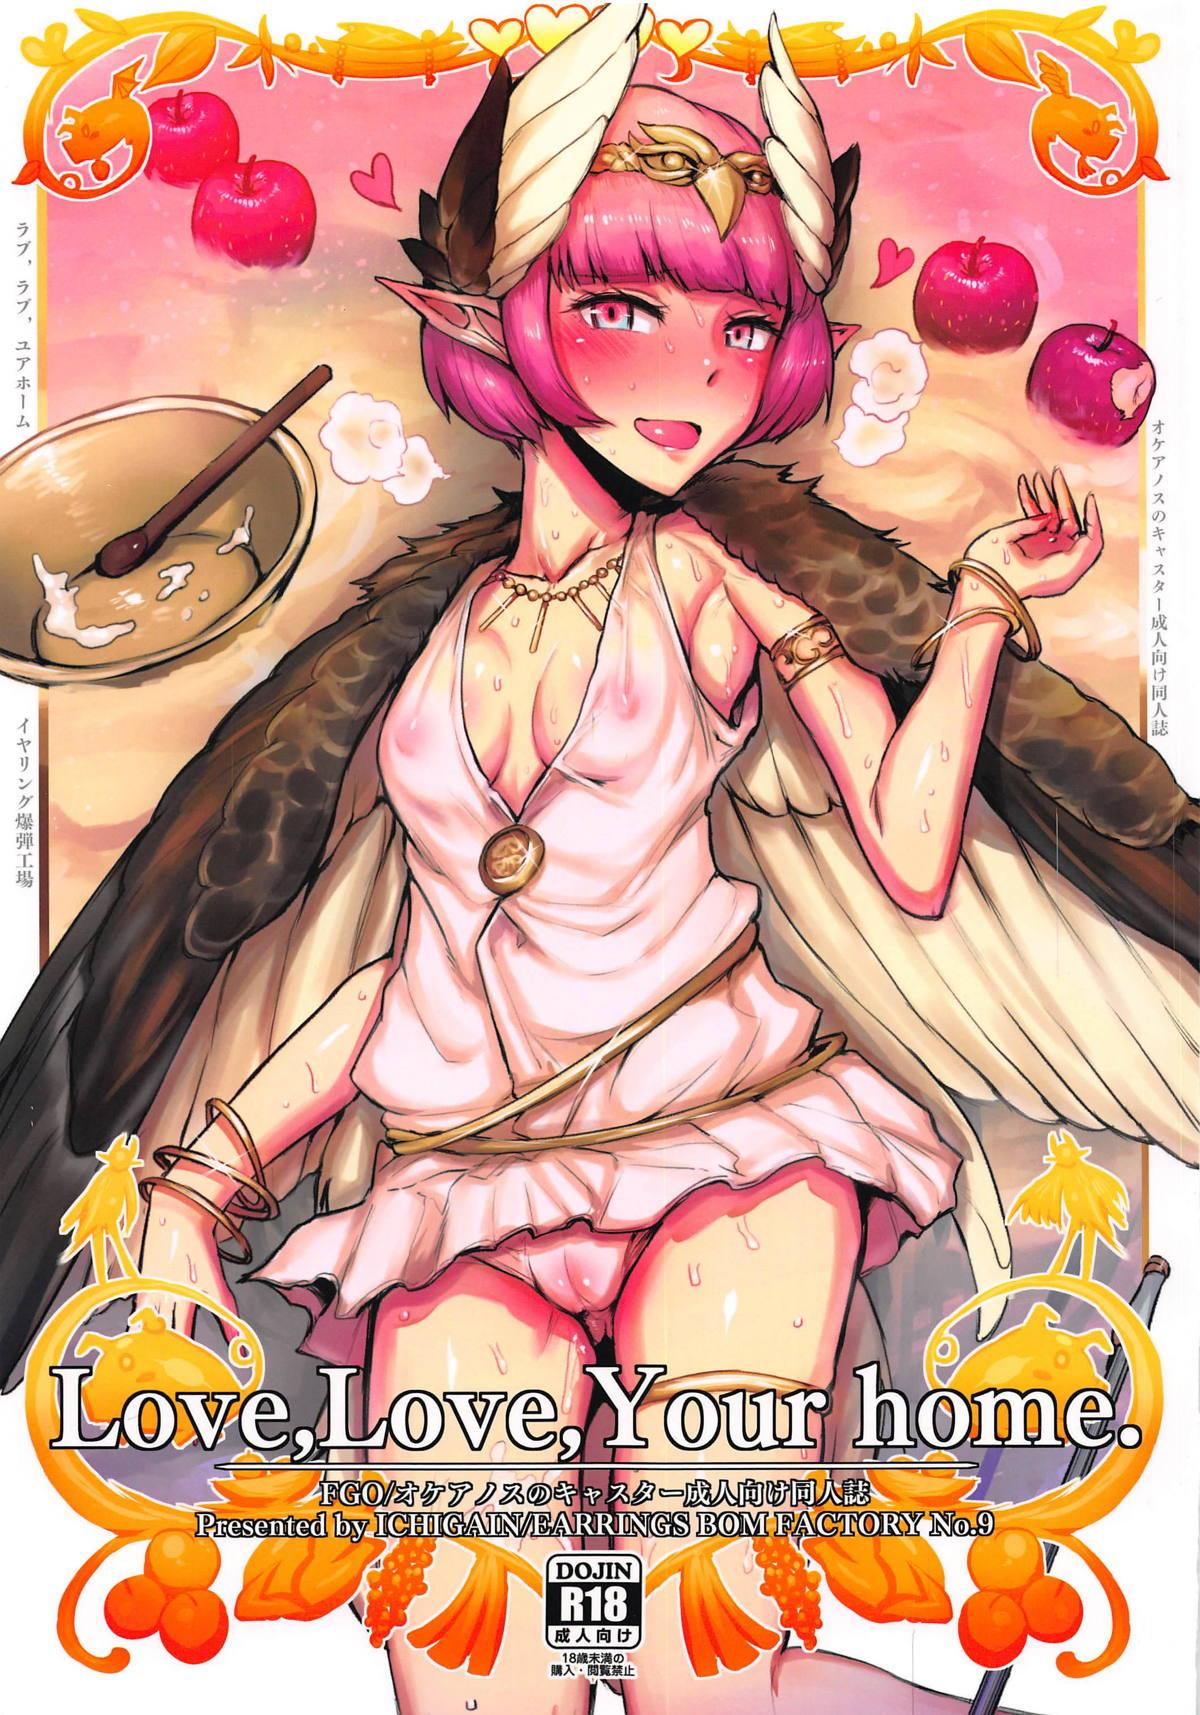 Orgasmo Love, Love, Your home. - Fate grand order Anime - Page 1